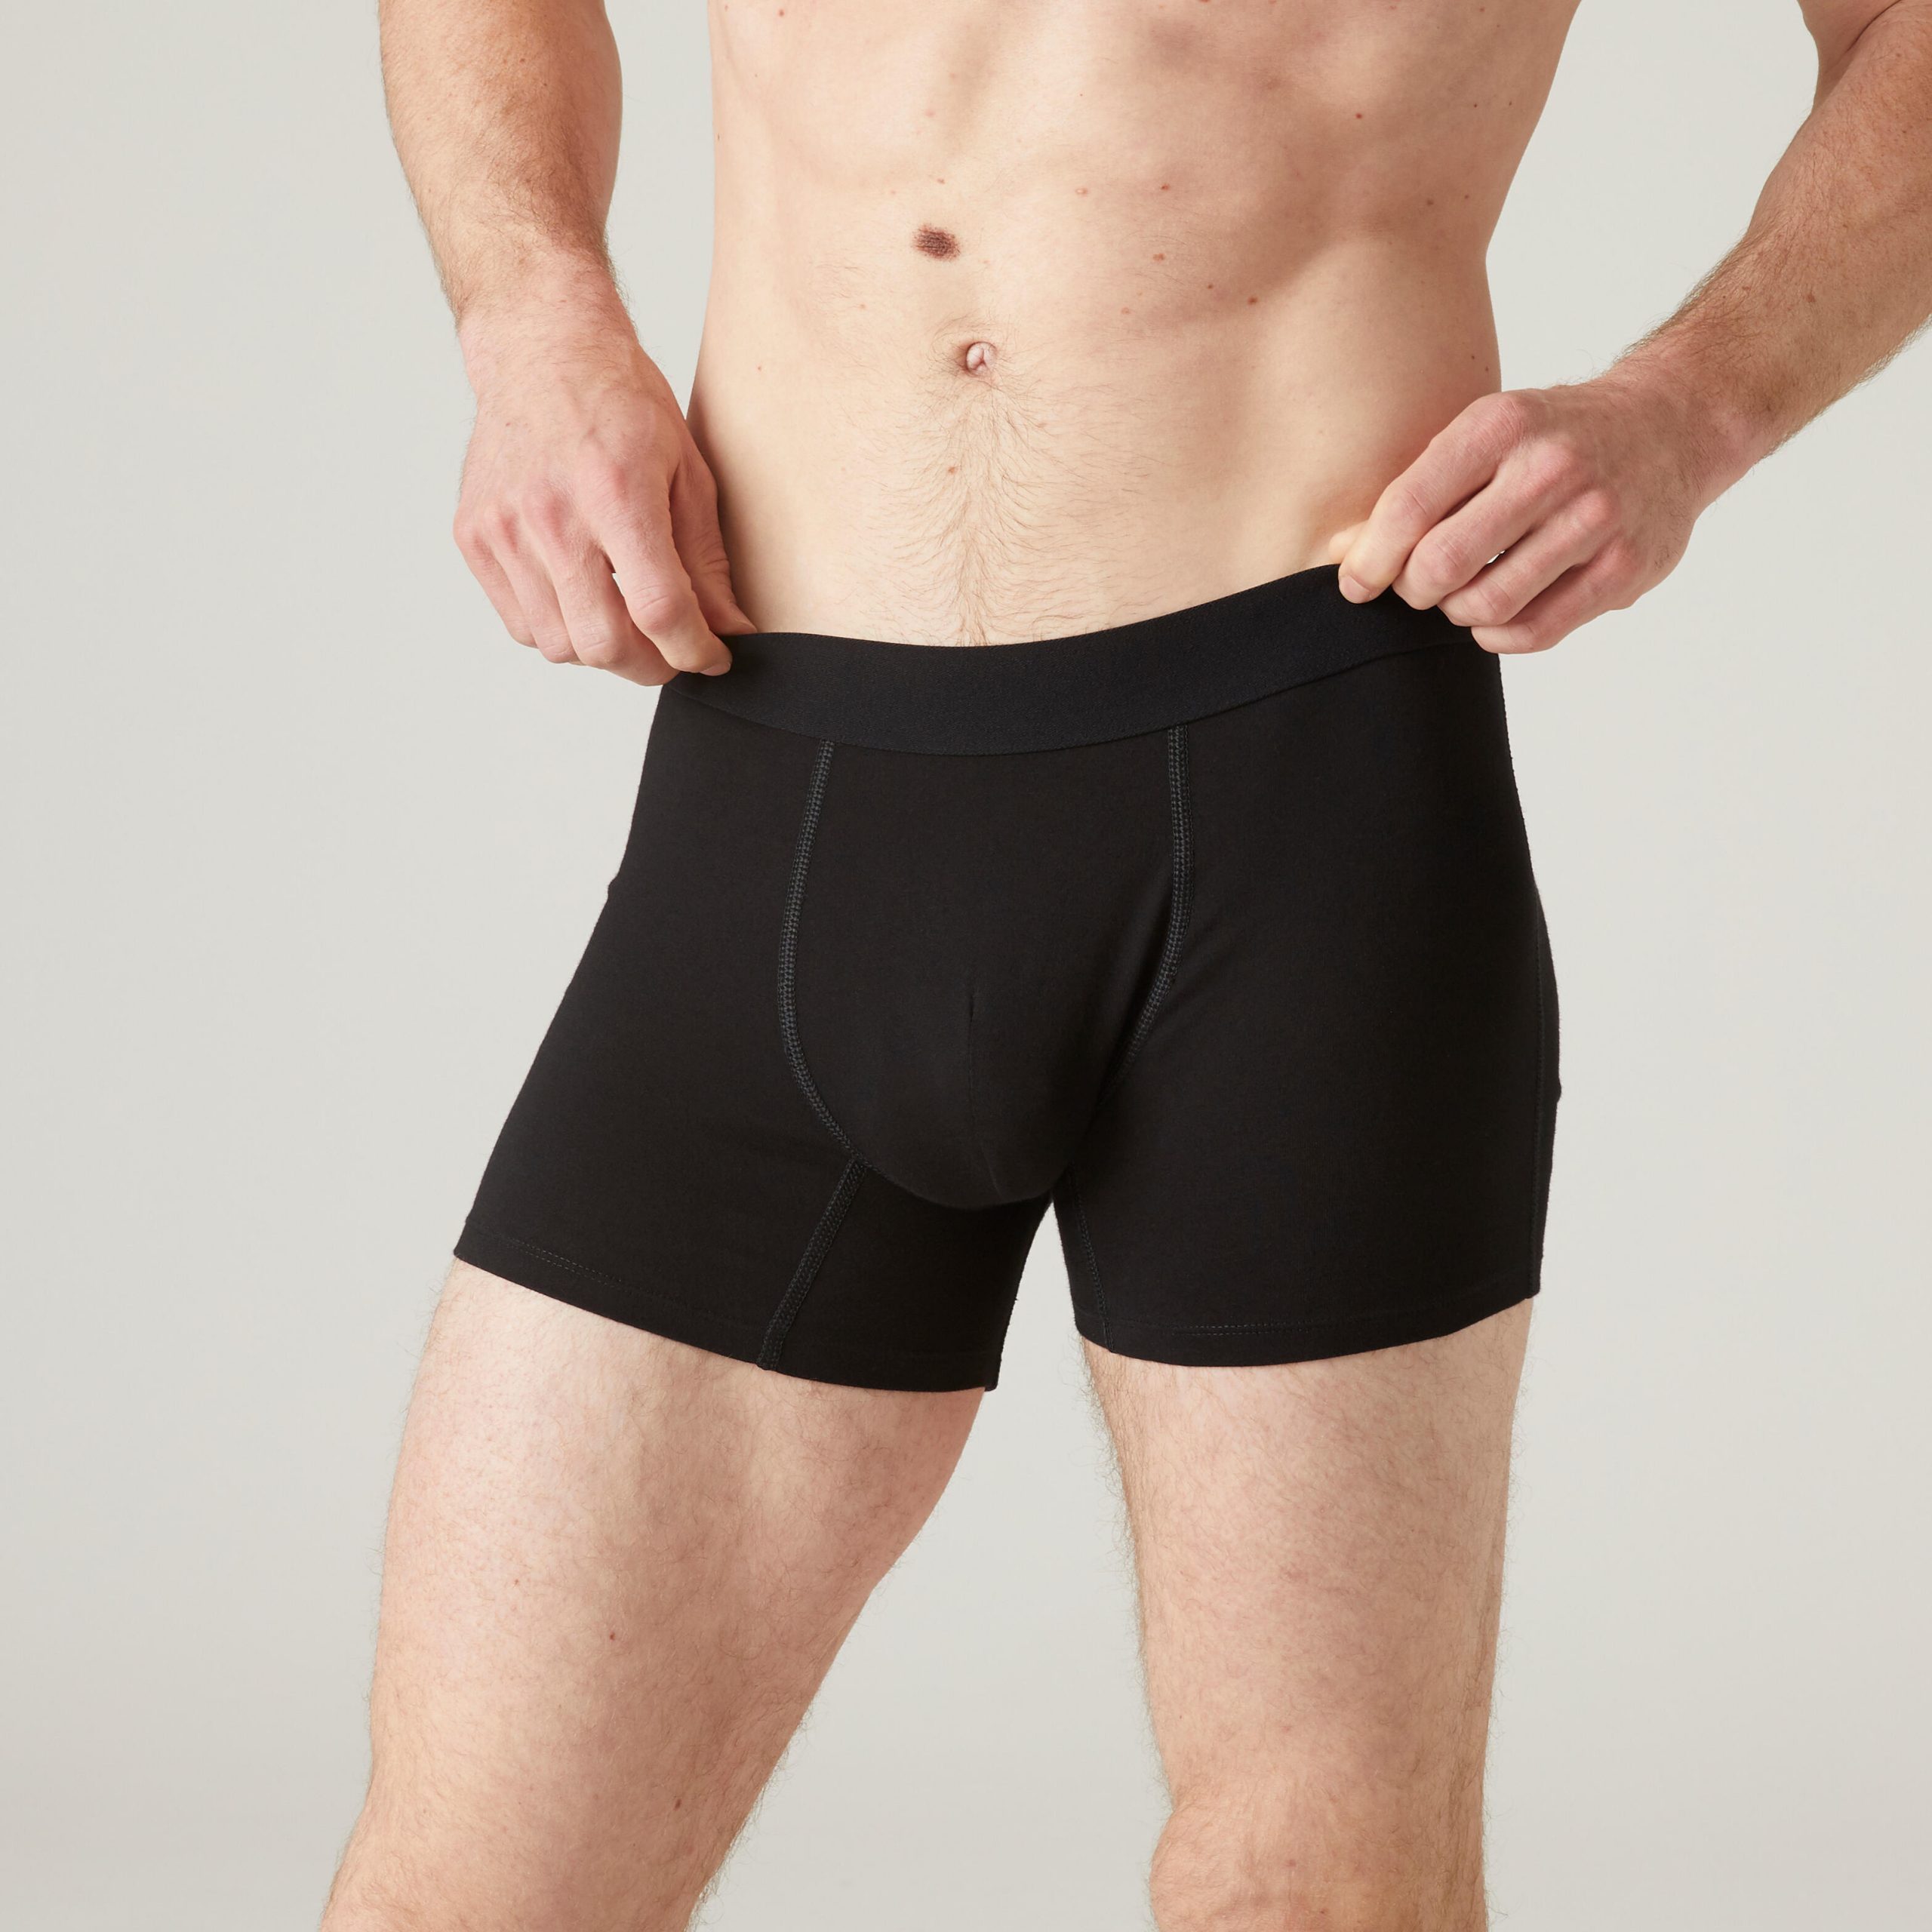 How To Feel Good with Men's G-string underwear